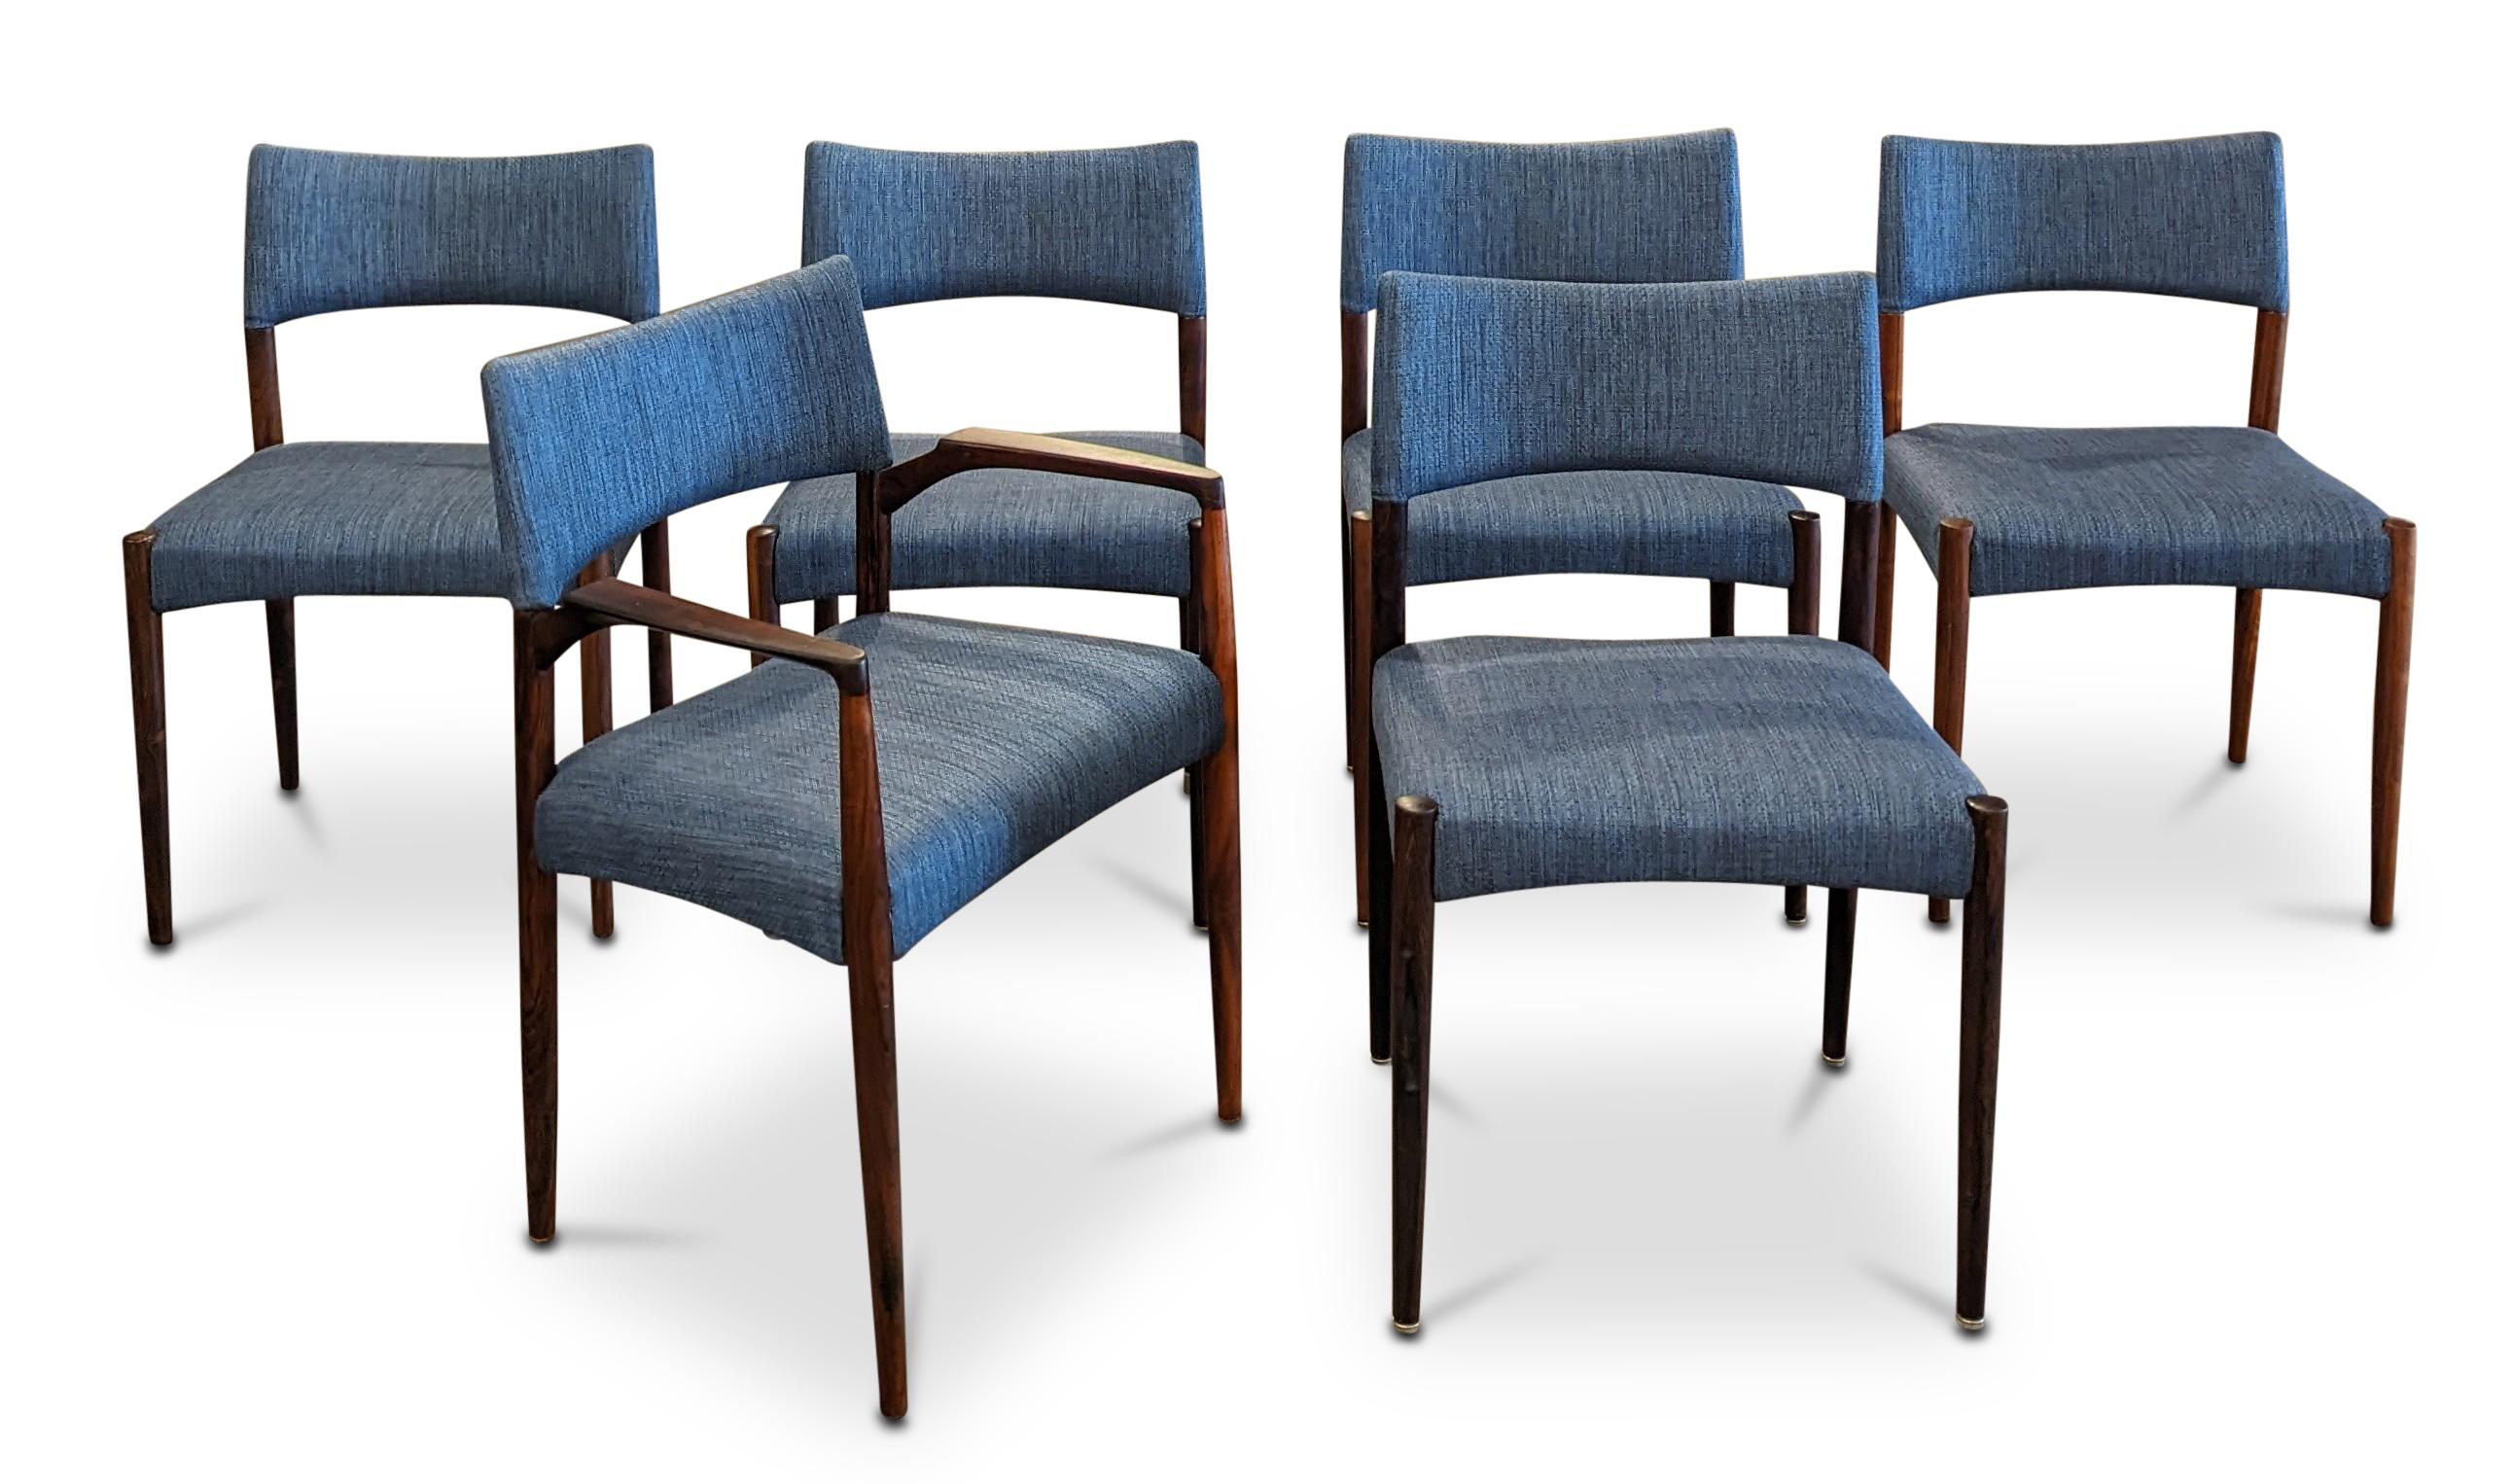 6 Aksel Bender Madsen Rosewood Dining Chairs - 072342 Vintage Danish Mid Century In Good Condition In Jersey City, NJ